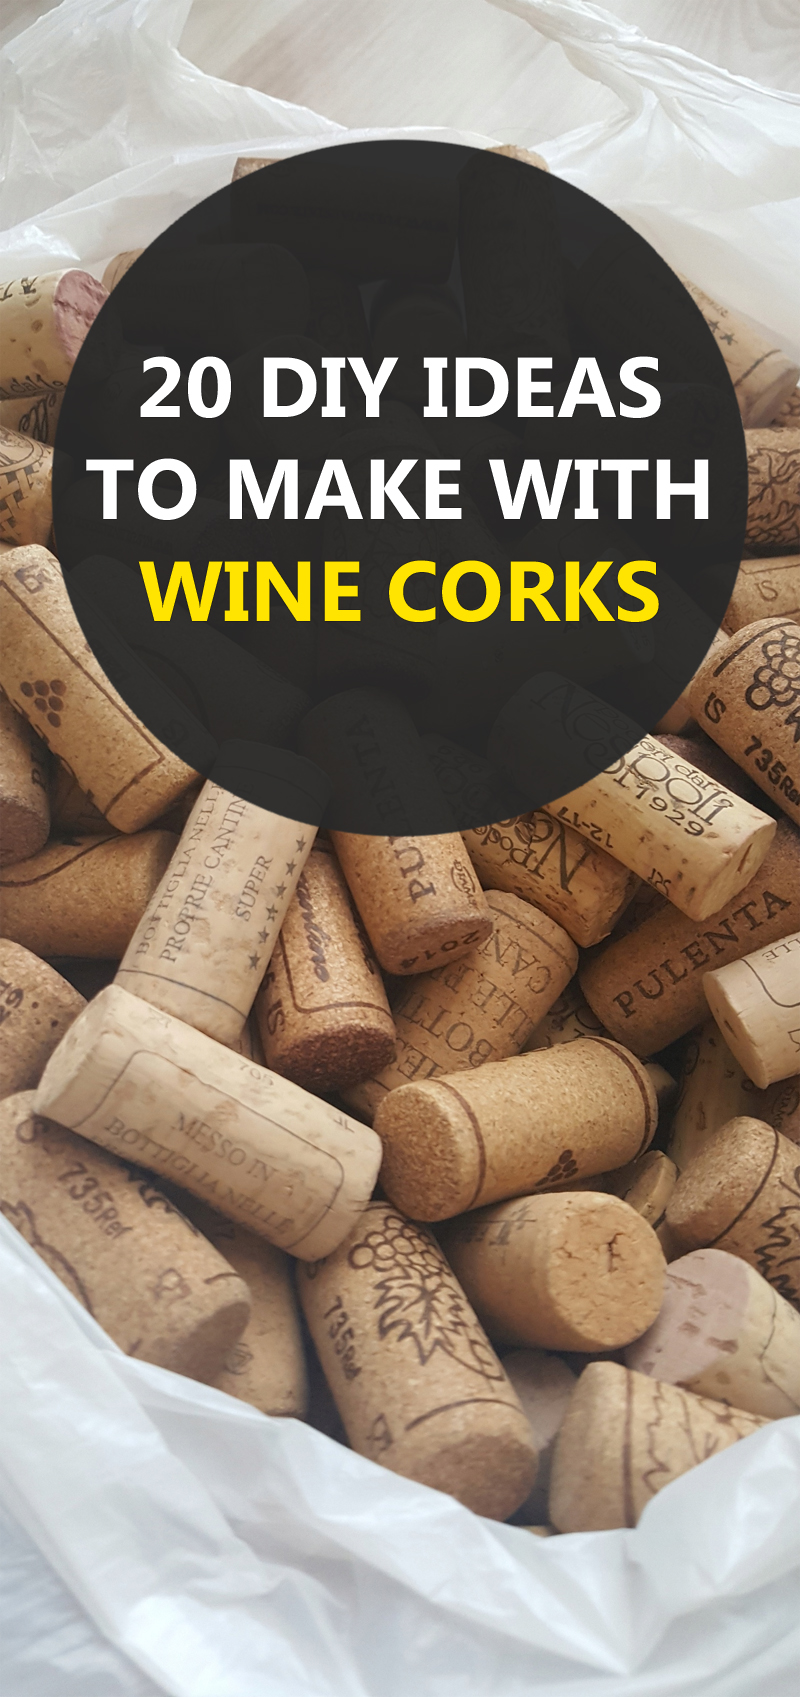 20 DIY Ideas to Make With Wine Corks